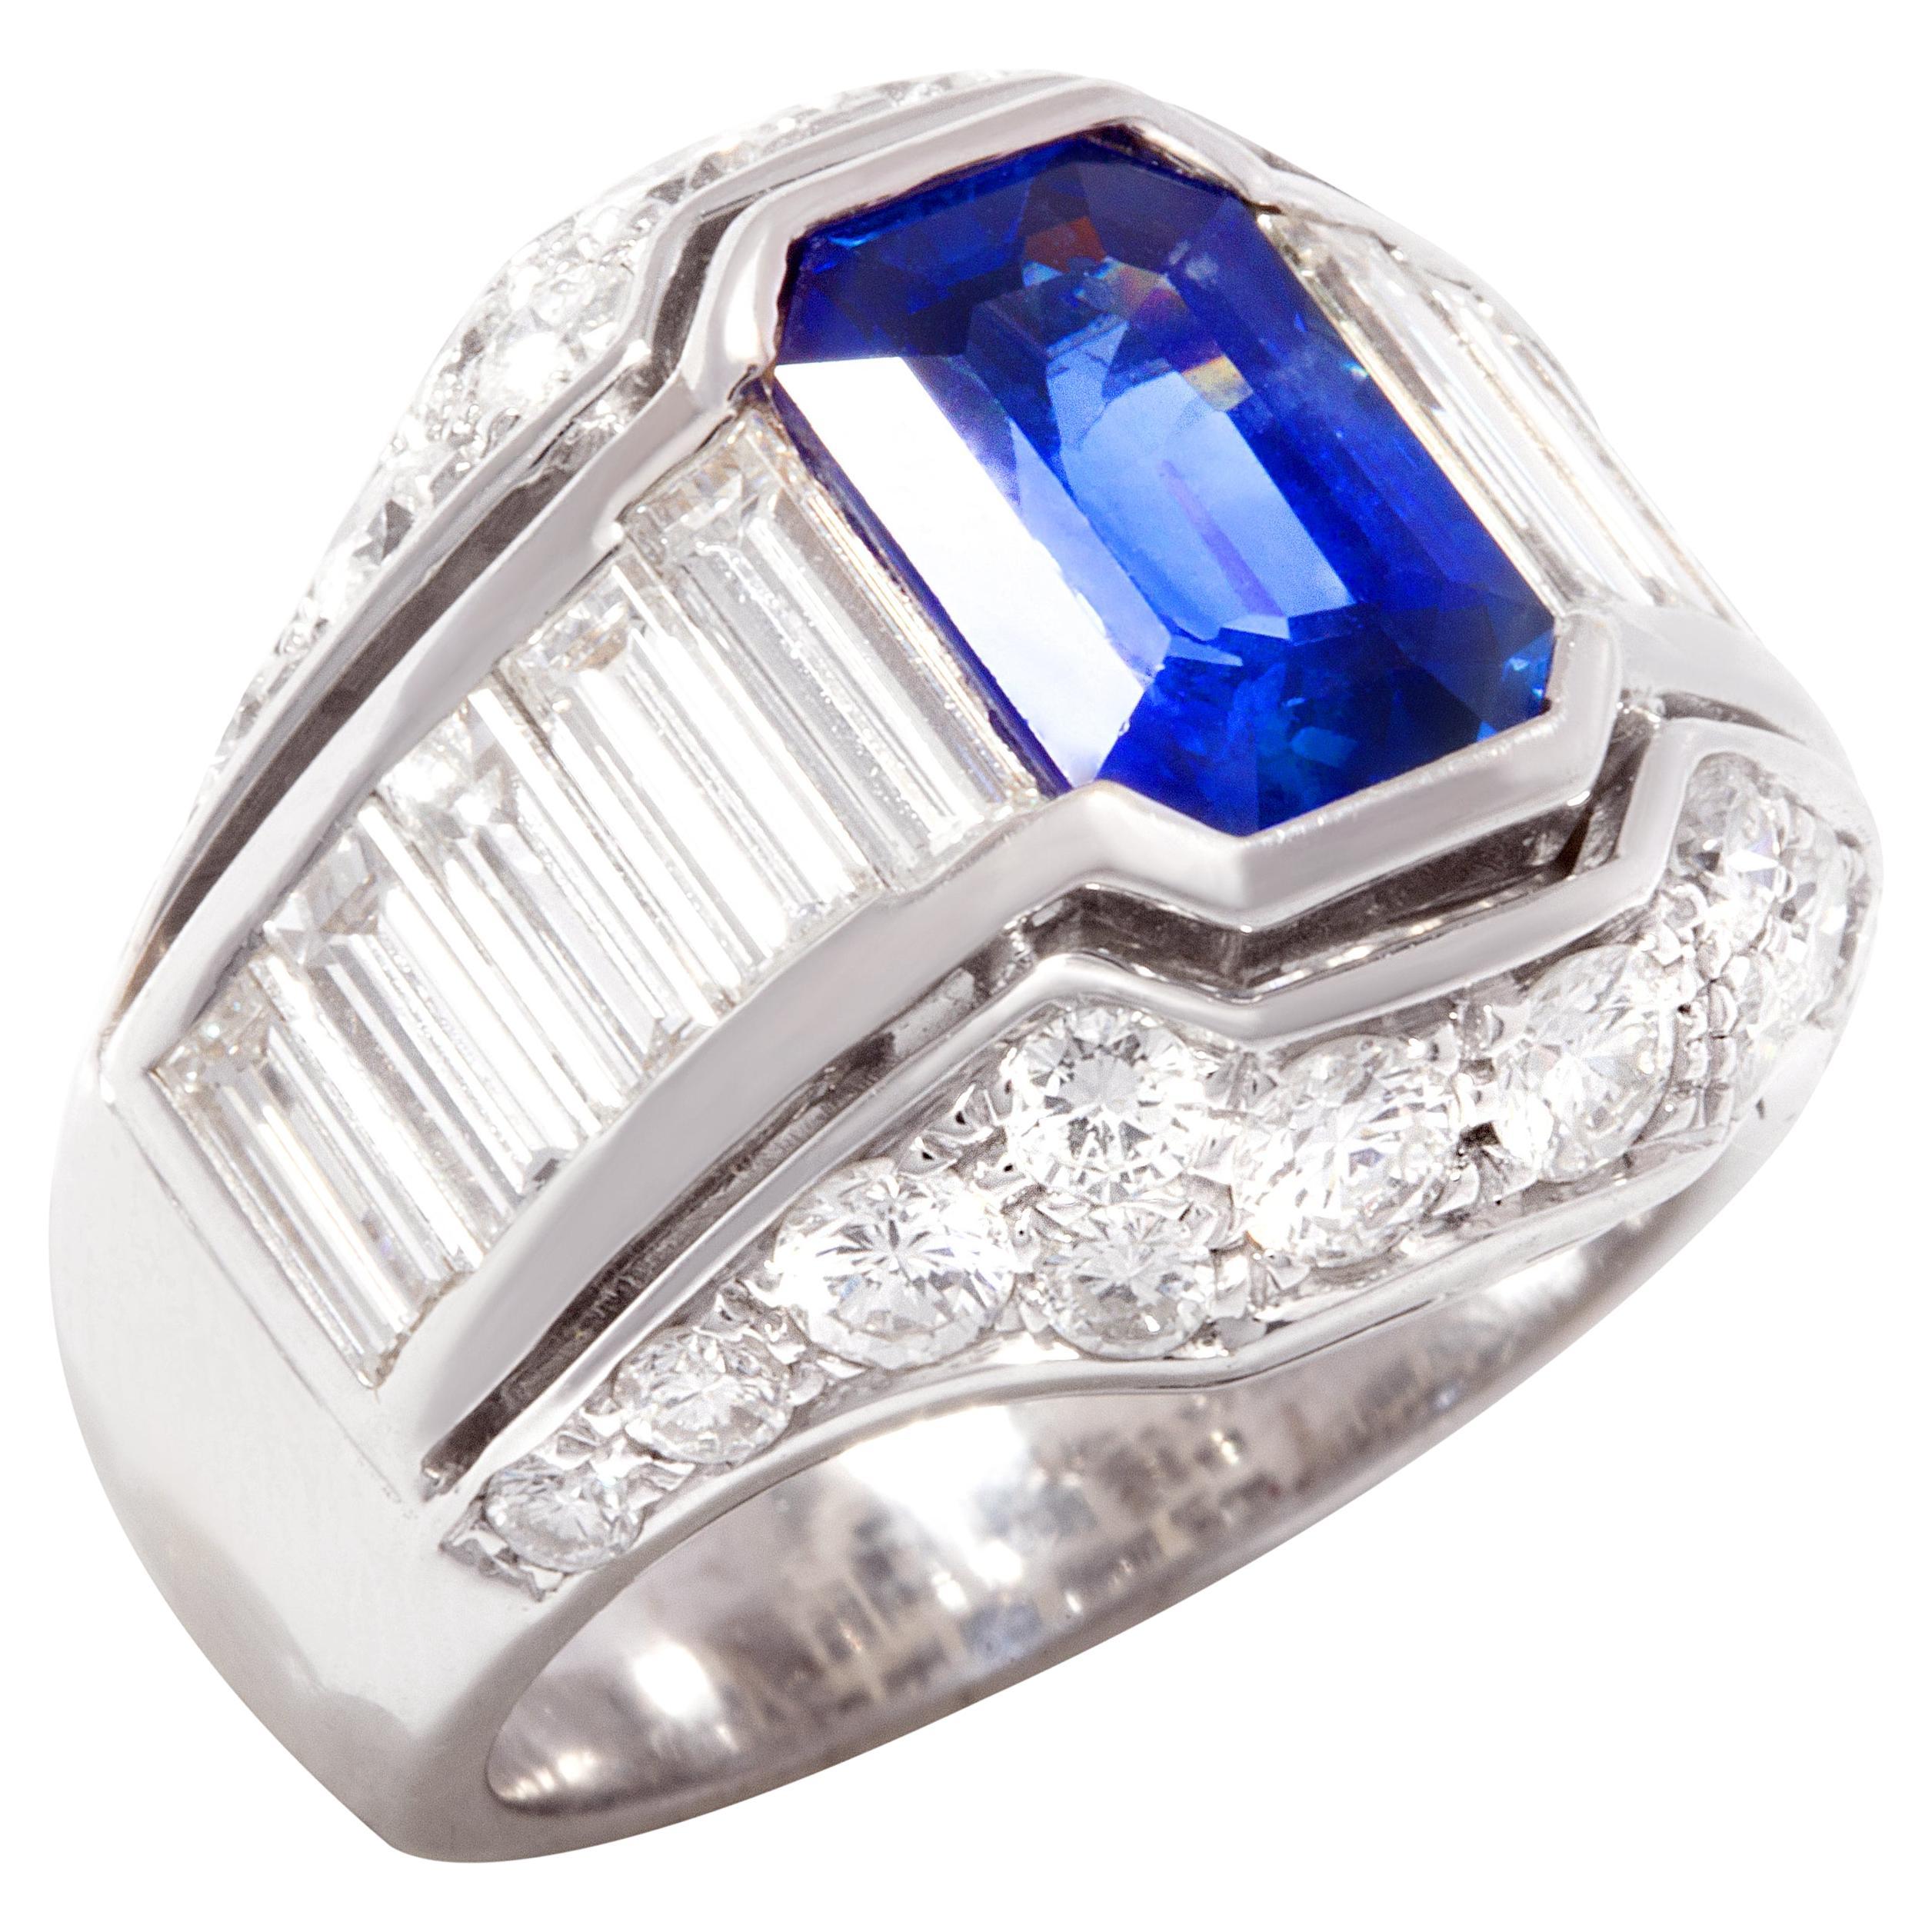 Ella Gafter Sapphire Diamond Cocktail Ring For Sale